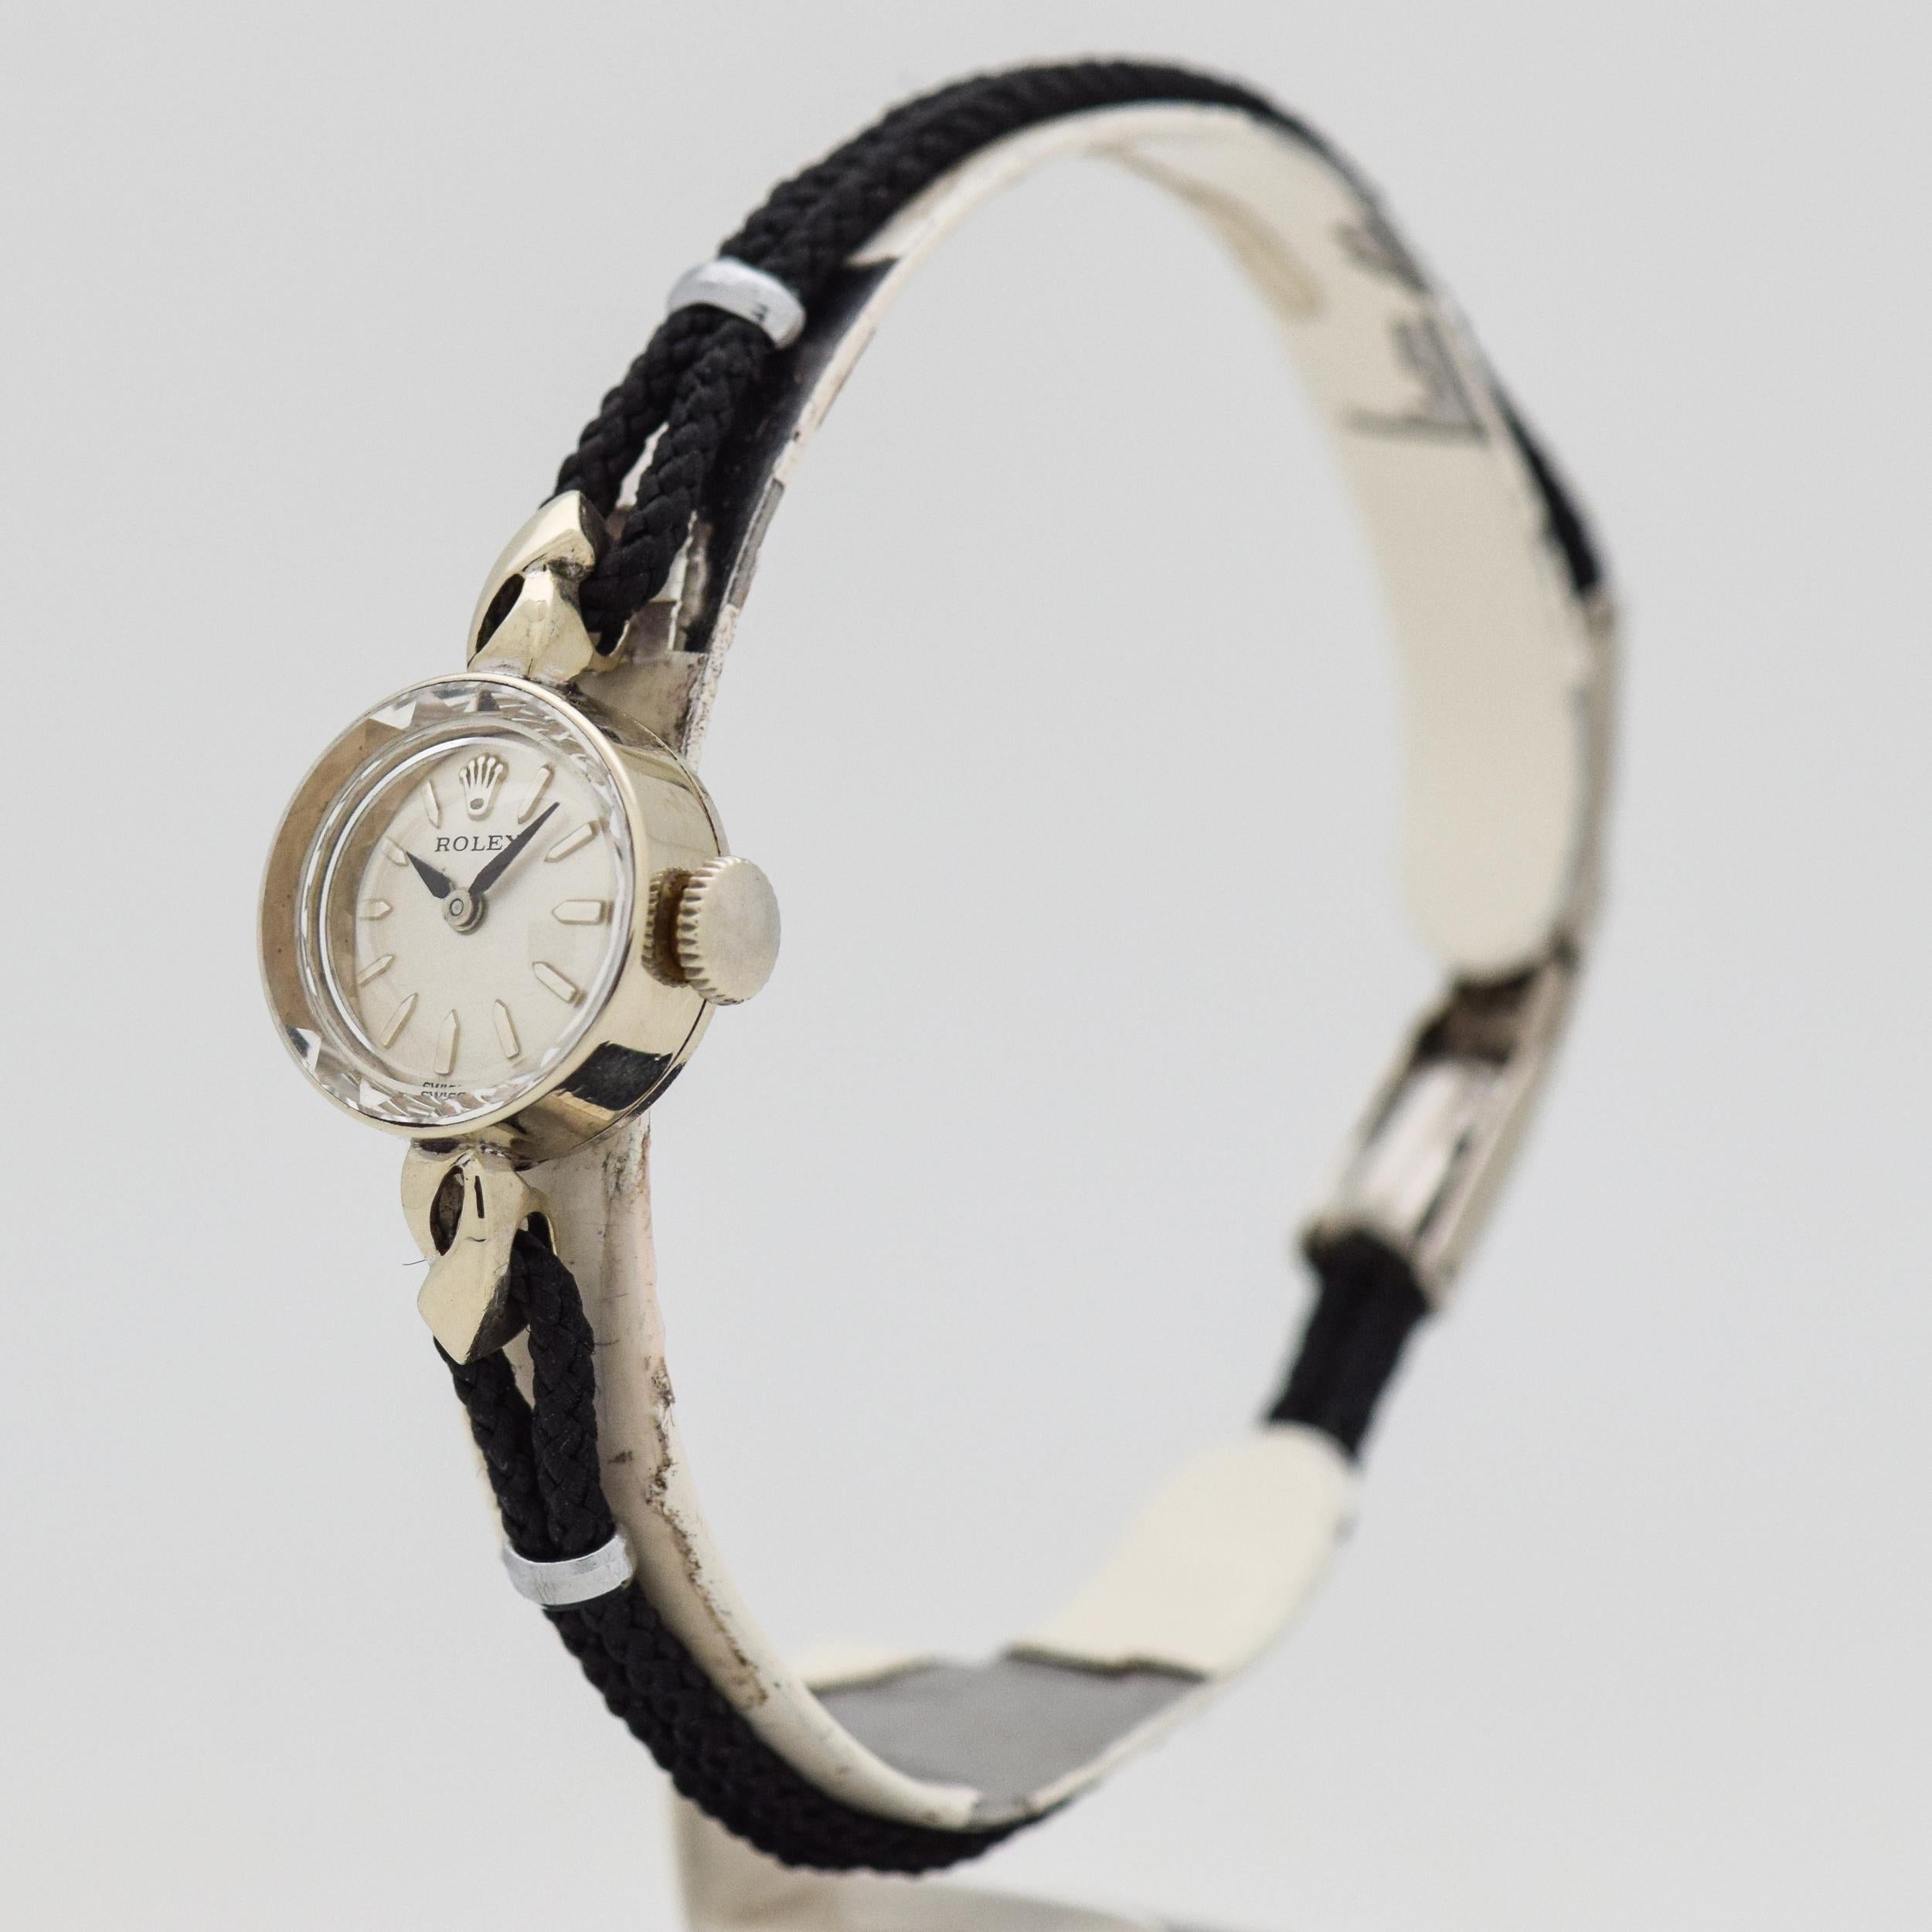 1960's Vintage Rolex Ladies 14k White Gold watch with Silver Dial with Applied Steel Pointed Tip Stick/Bar/Baton Markers. 14mm x 25mm lug to lug (0.55 in. x 0.98 in.) - Powered by a 17-jewel, manual caliber movement. Triple Signed.